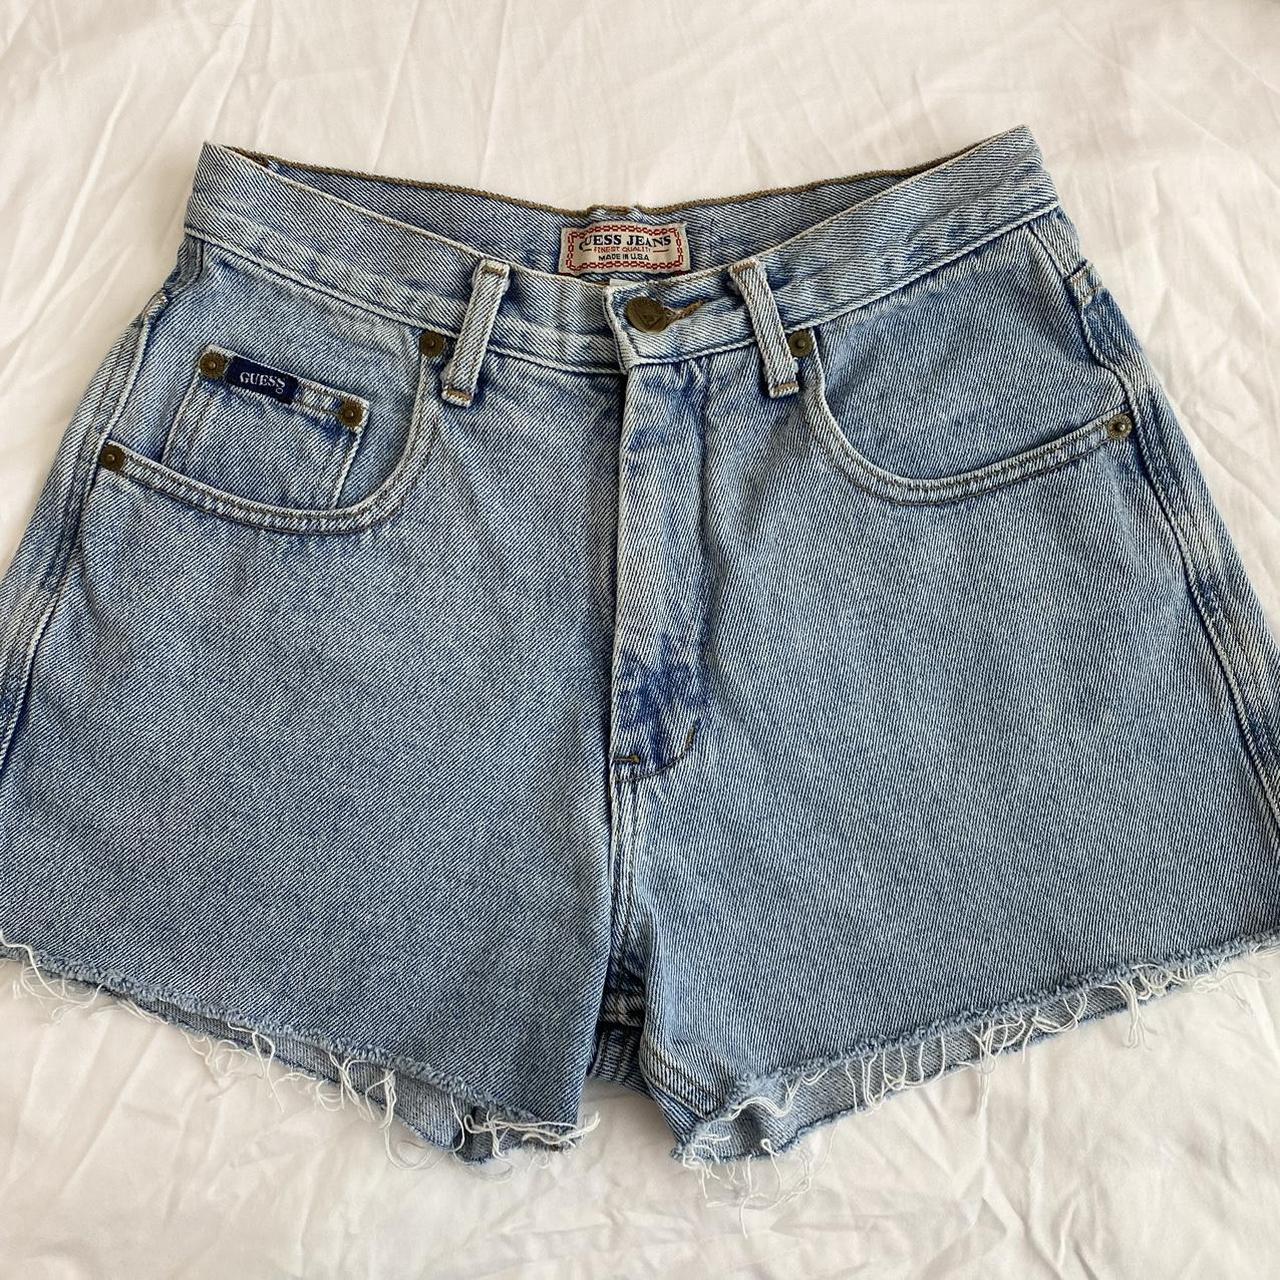 🇺🇸👖Vintage Guess Jean Shorts👖🇺🇸 - Made in the... - Depop